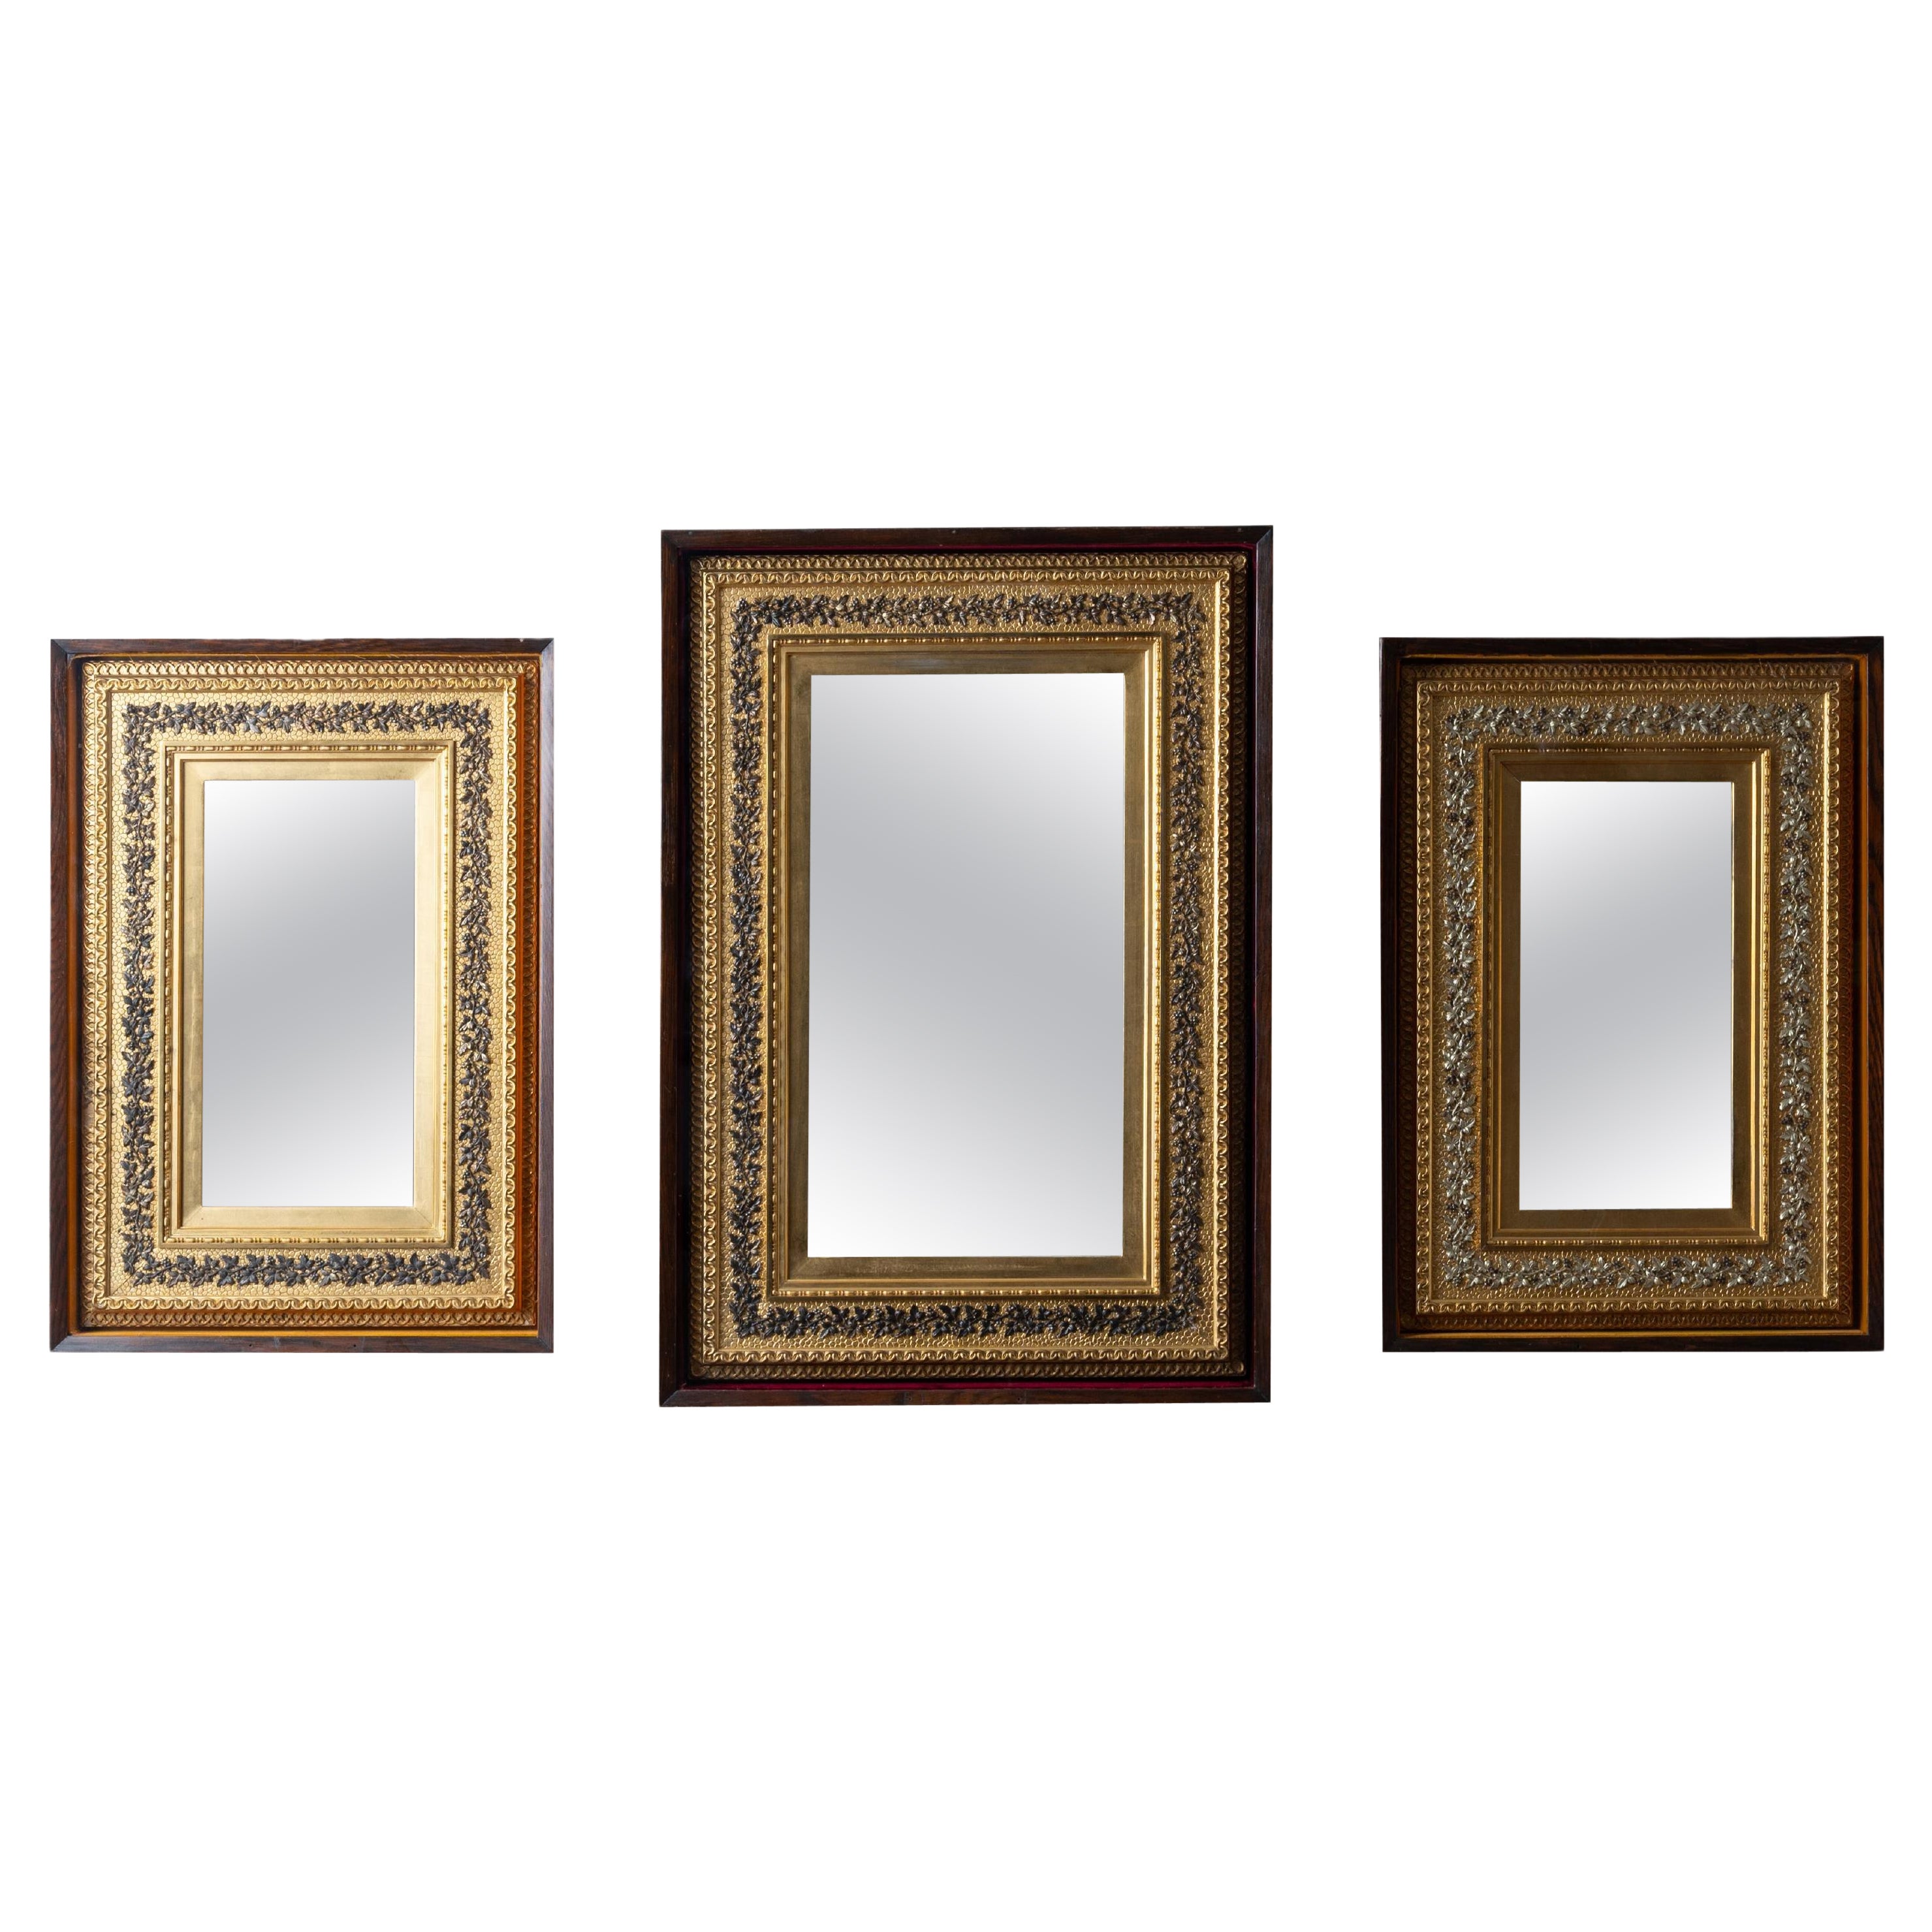 Gilt Mirrors in Shadowbox Frames, c.1890, set of 3 For Sale